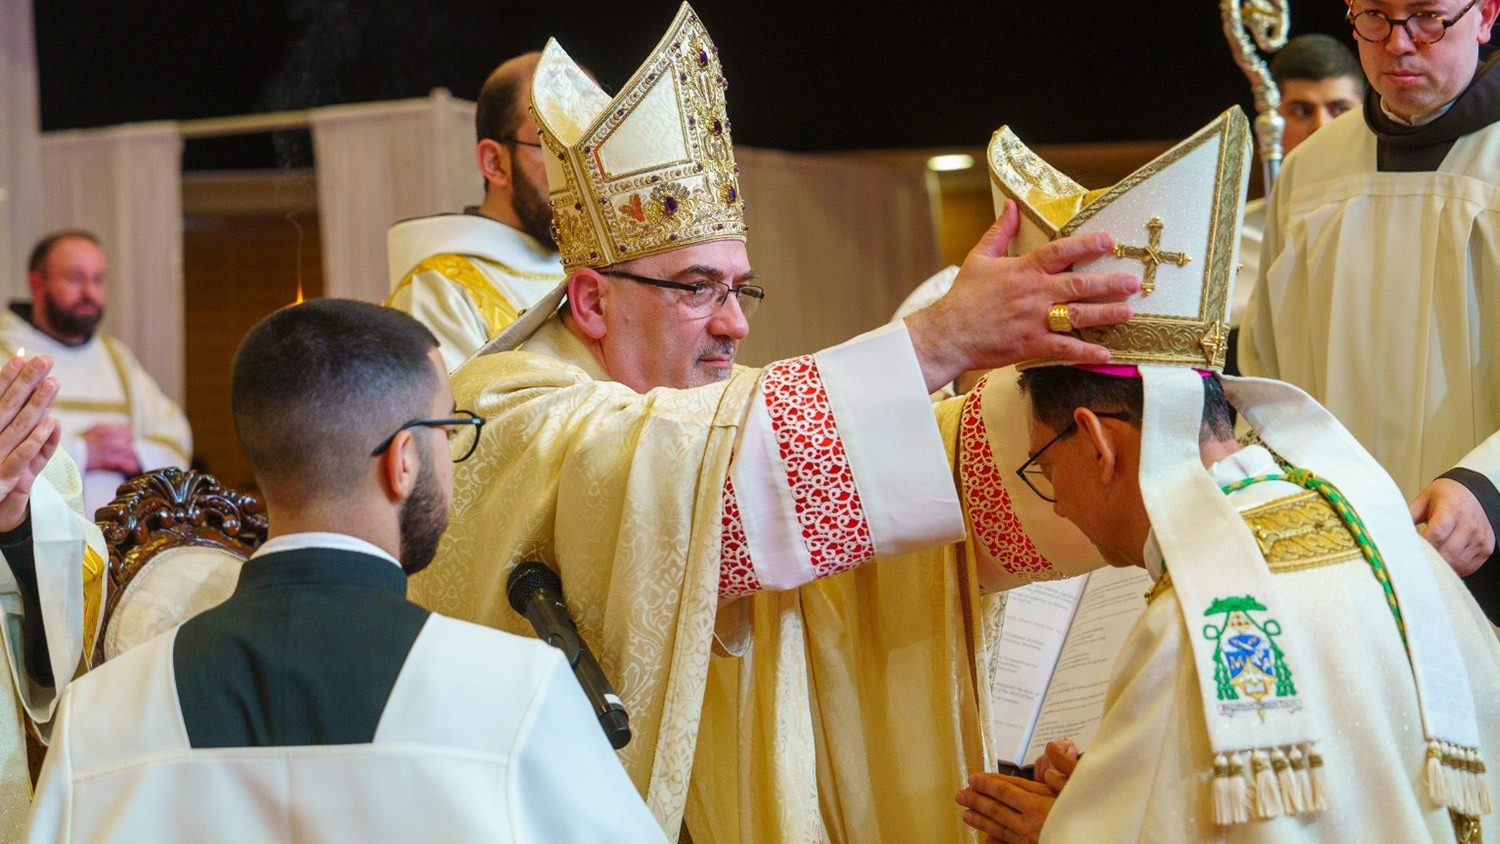 A historical moment: Bishop of the island of Cyprus after 340 years